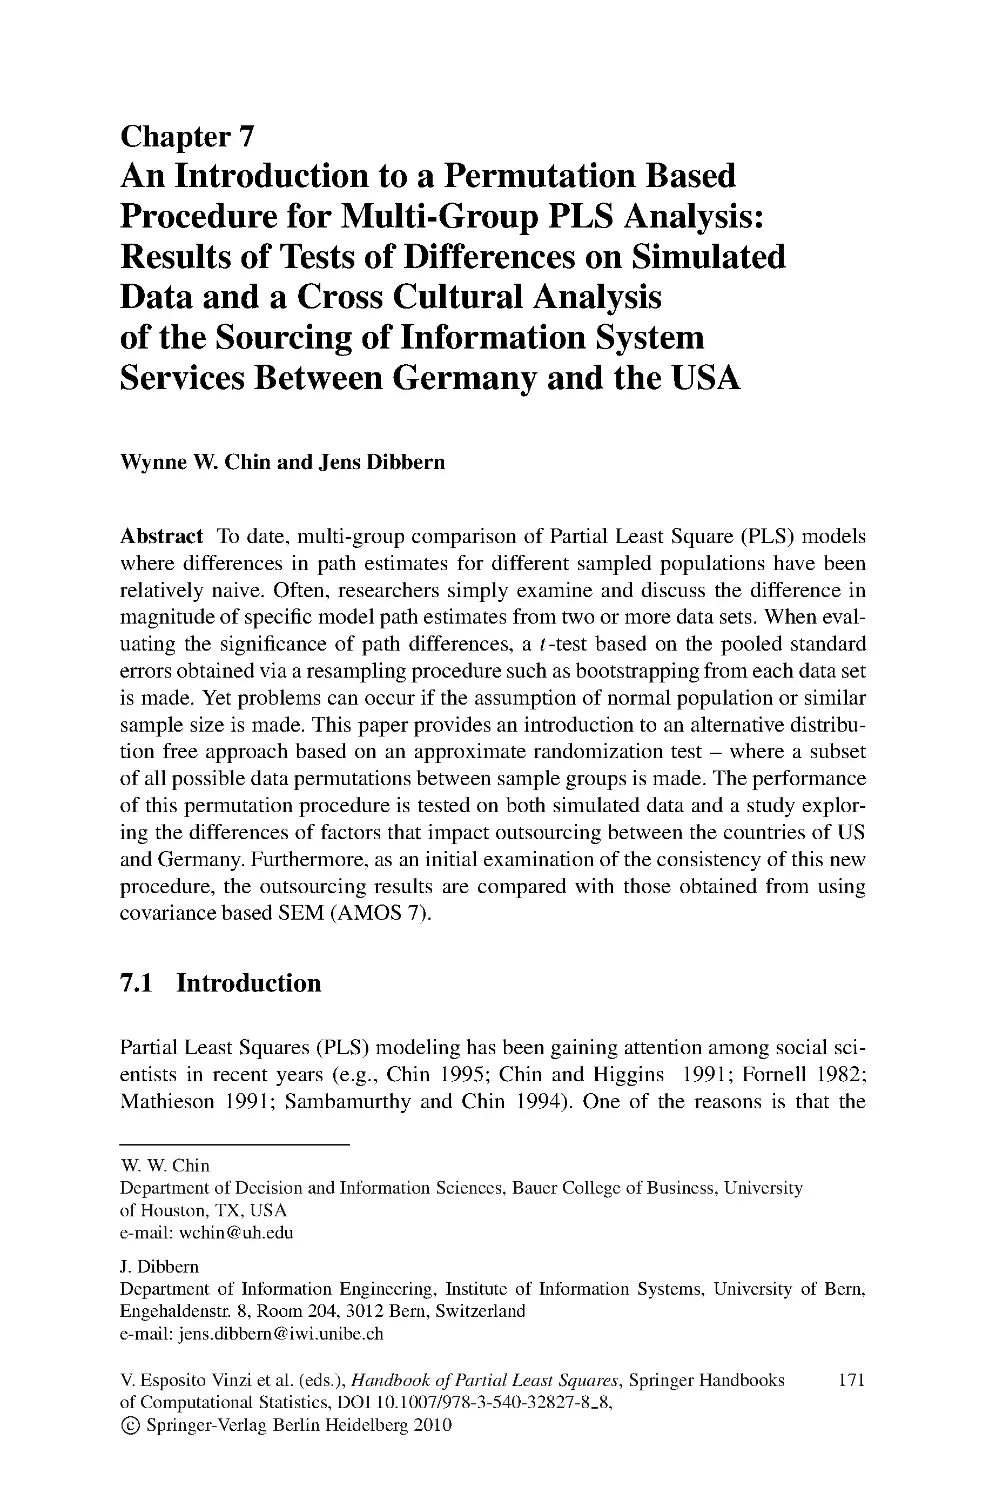 7 An Introduction to a Permutation Based Procedure for Multi-Group PLS Analysis: Results of Tests of Differences on Simulated Data and a Cross Cultural Analysis of the Sourcing of Information System Services Between Germany and the USA